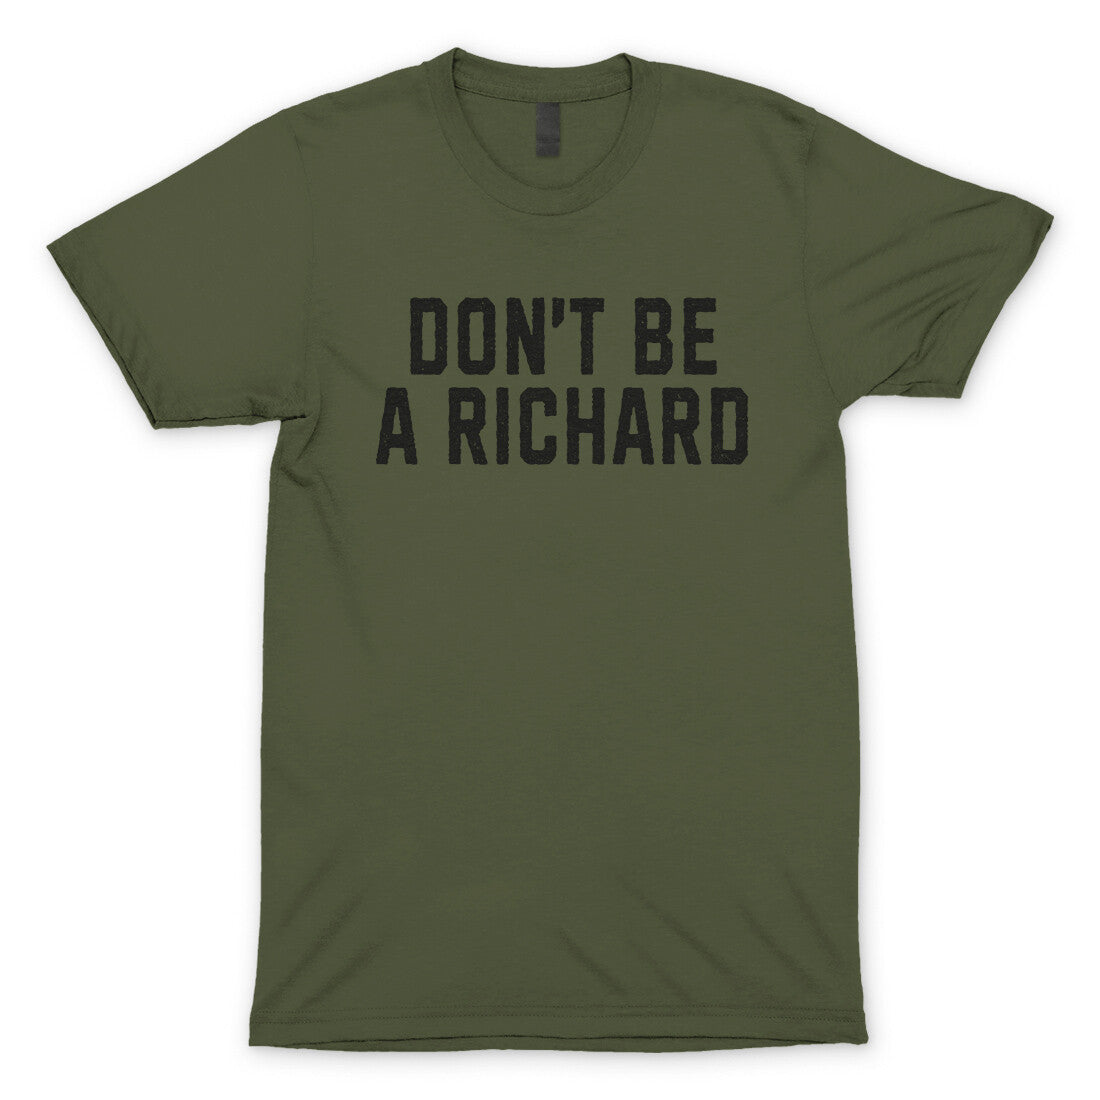 Don't Be a Richard in Military Green Color